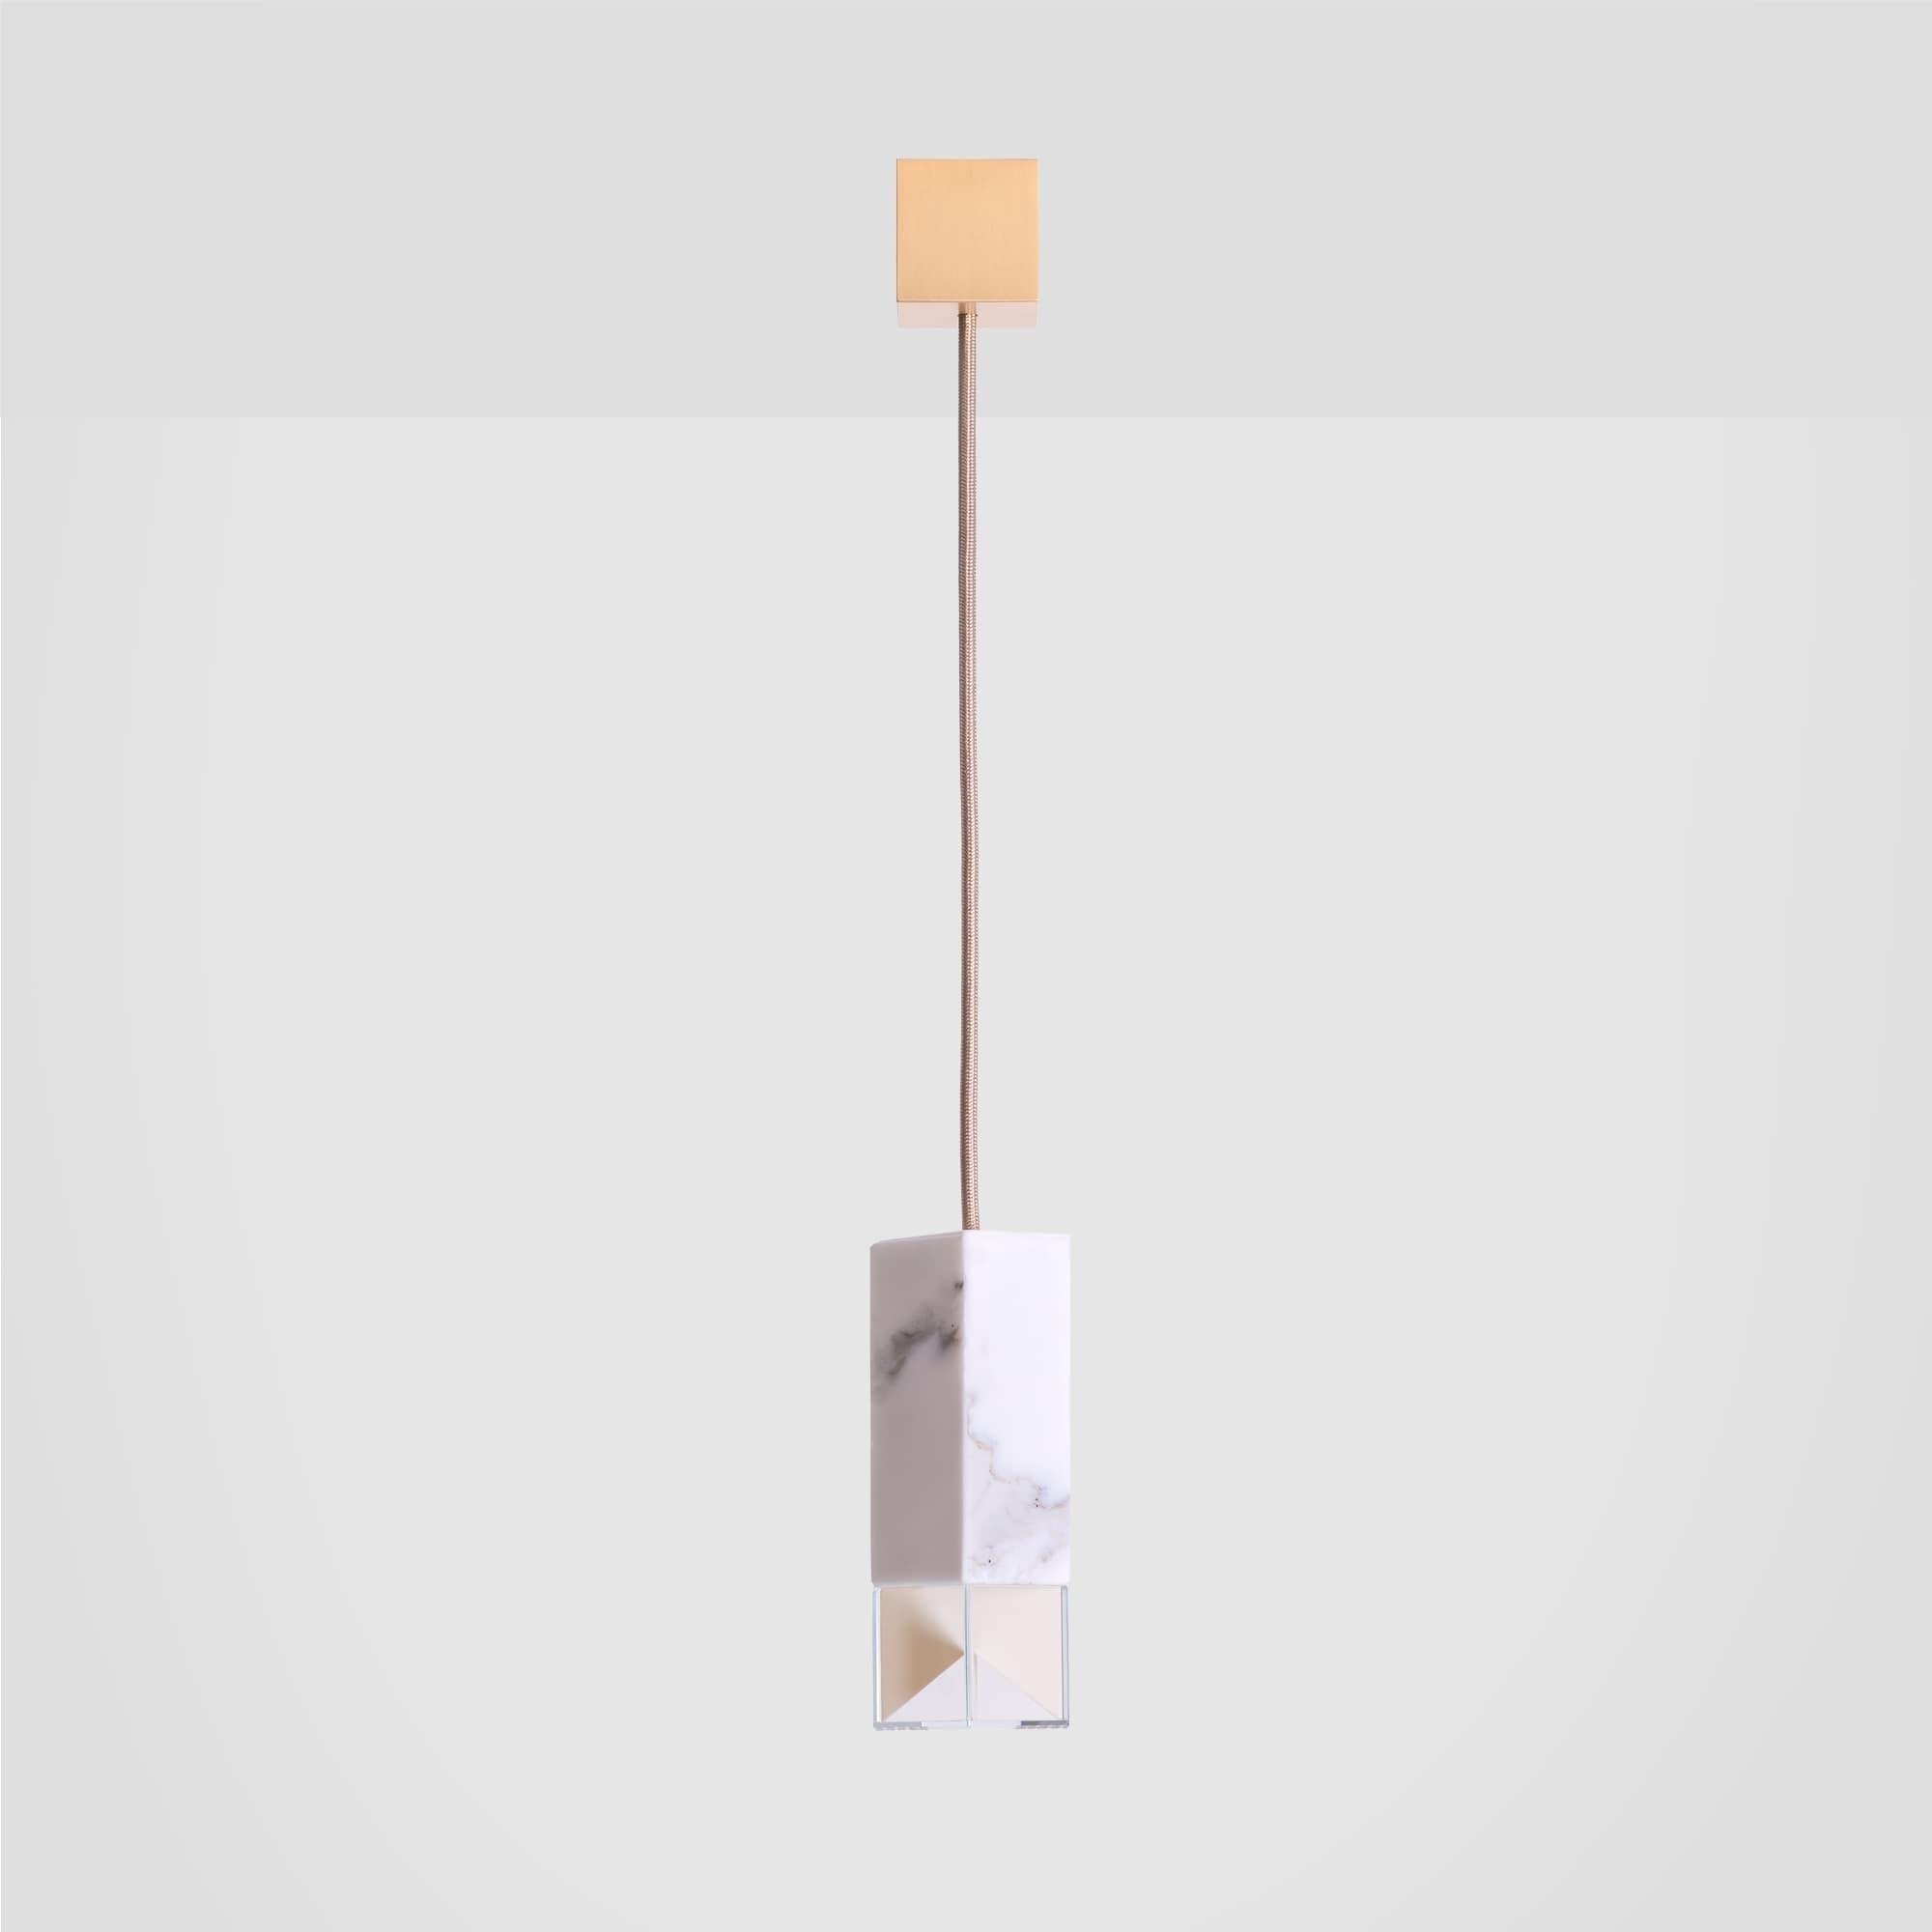 Lamp one in marble by Formaminima
Dimensions: 5 x 5 x H 17 cm
Materials: lamp body in Calacatta marble

Ultra- thin anti-reflection crystal diffuser
Inside- diffuser Limoges biscuit-finish porcelain sheets
Satin brass ceiling rose H 5 x 5 x 5